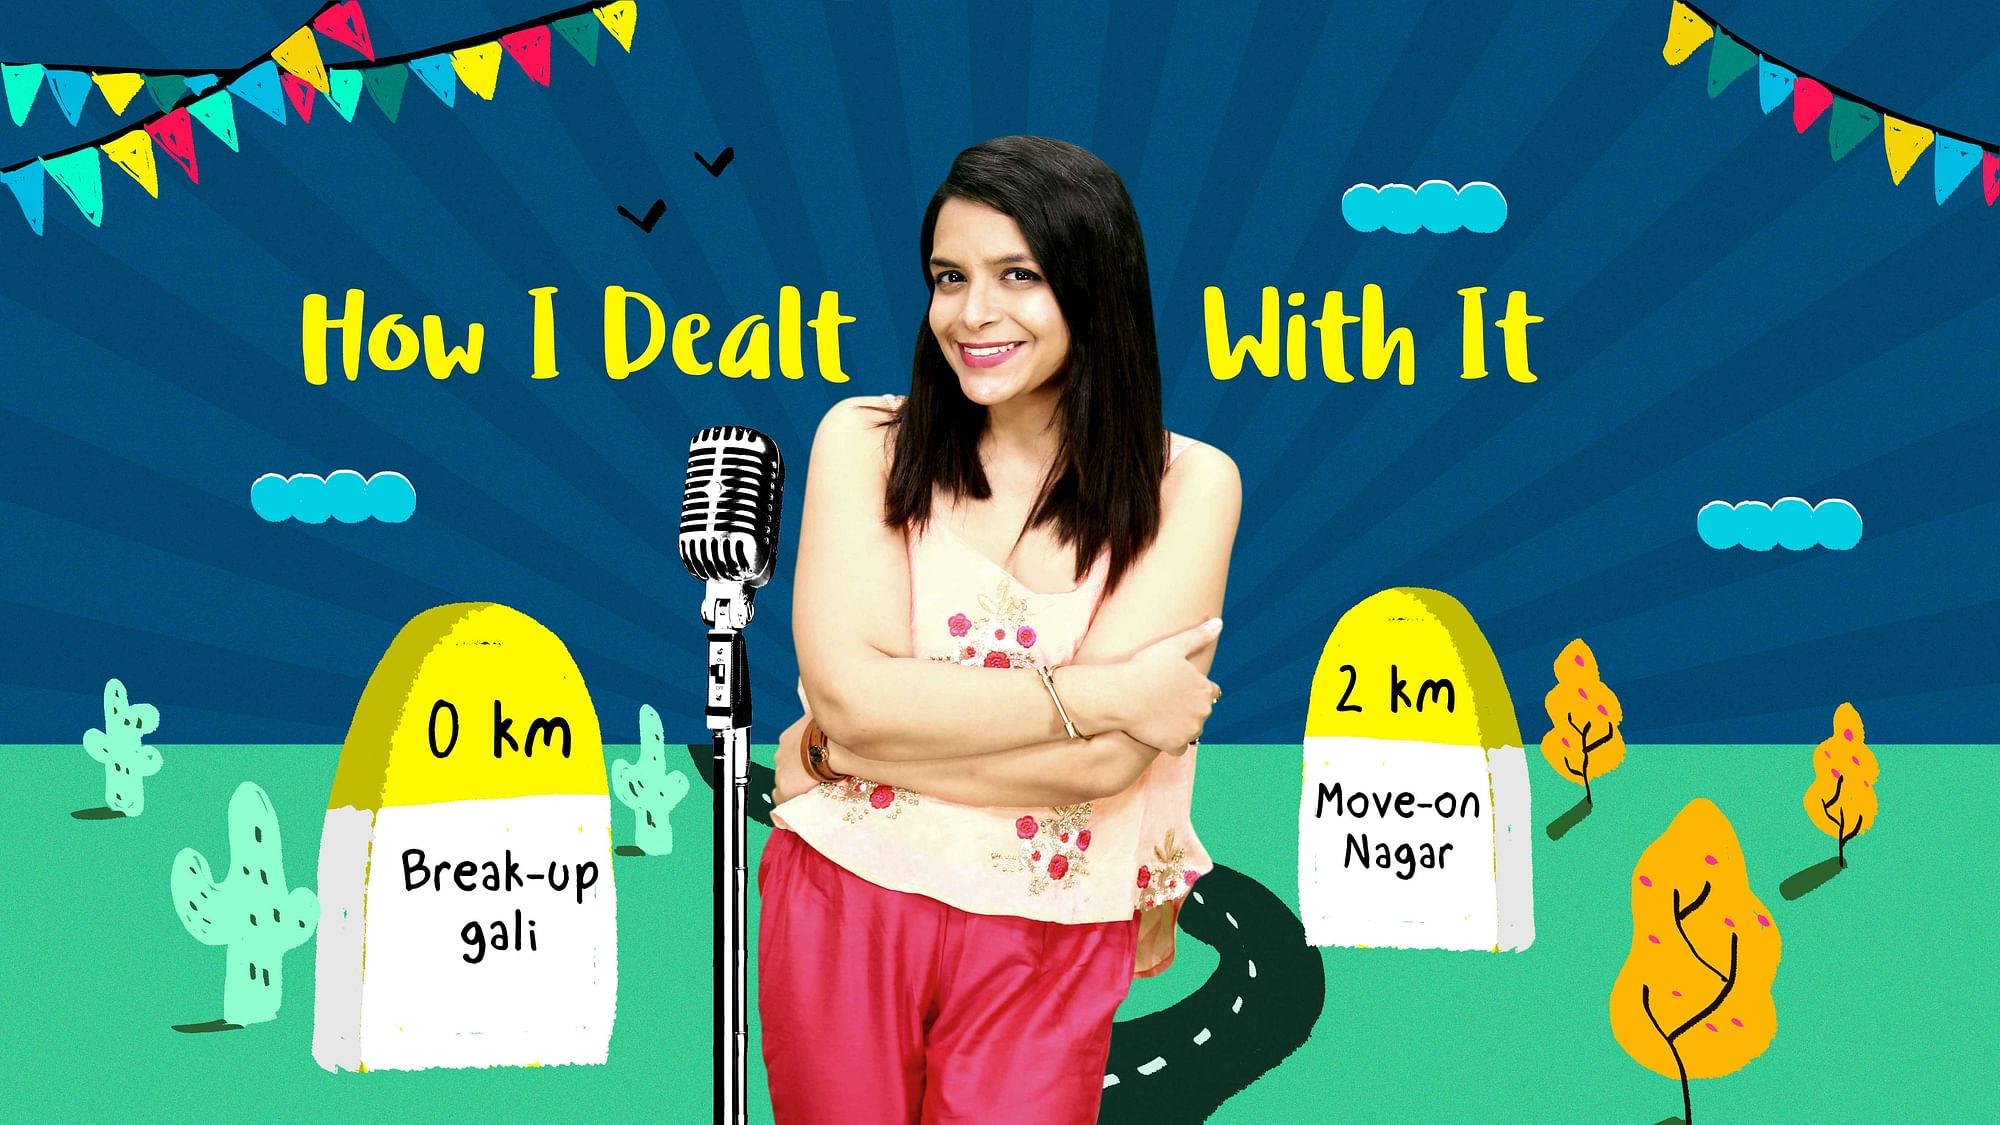 From Breakup Gali to Move On Nagar:  How I Dealt With It Episode 3